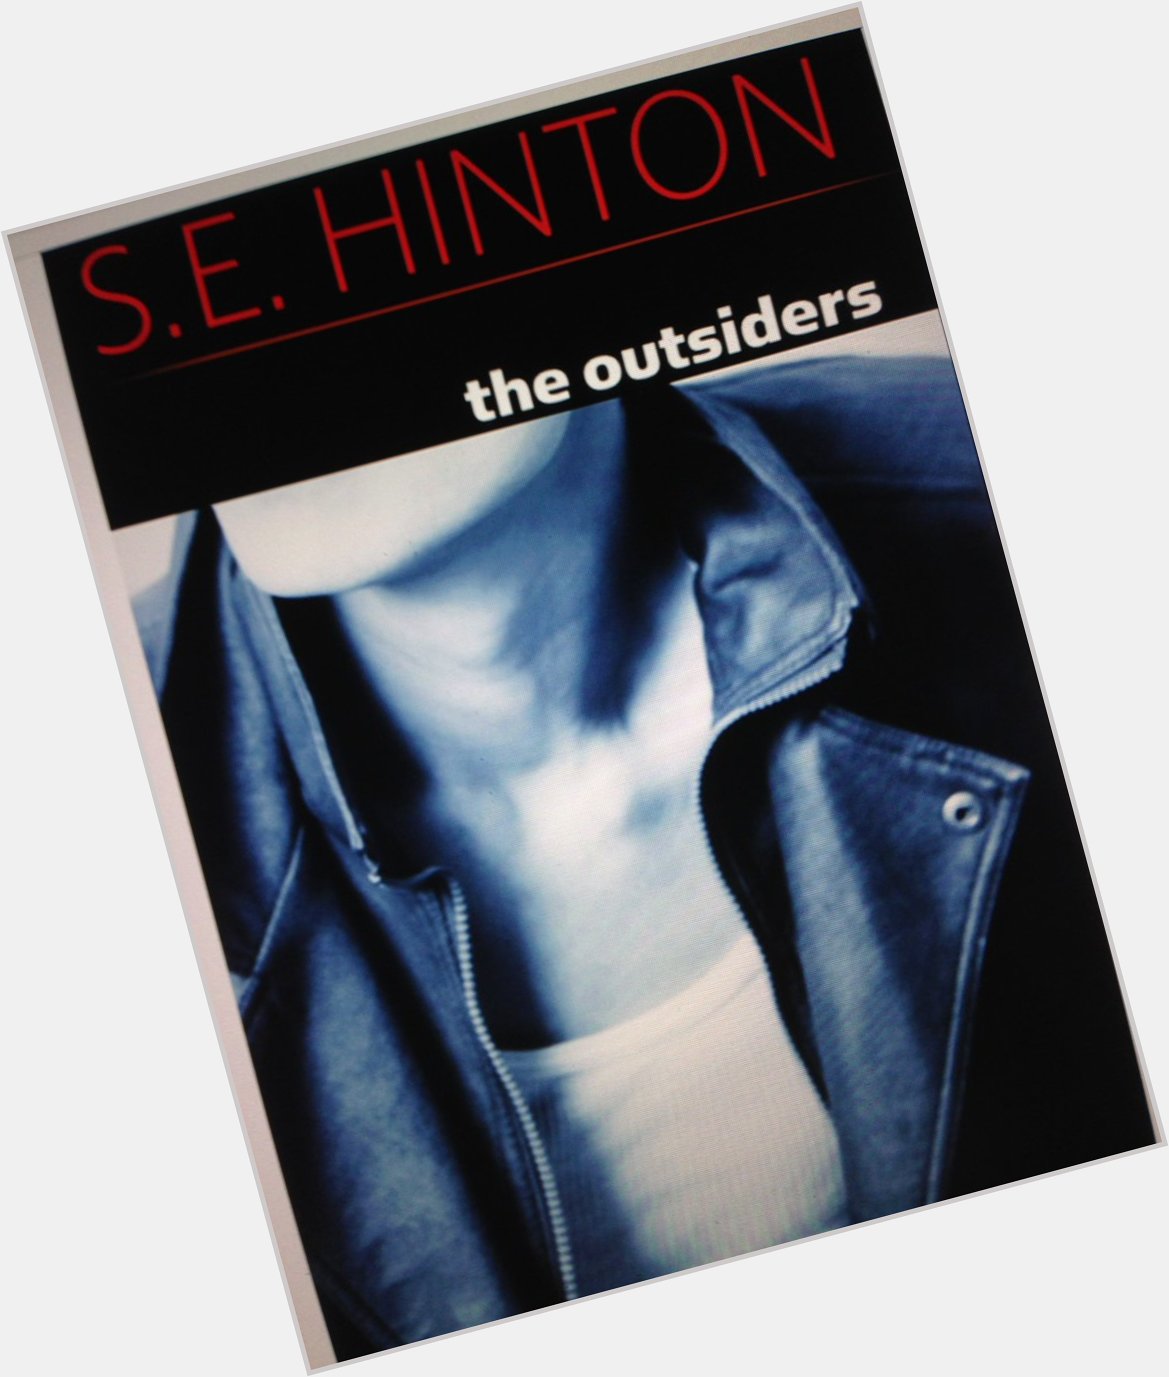 Happy Birthday S.E. Hinton. Her iconic story of Ponyboy and his world has had a profound impact on YA literature! 